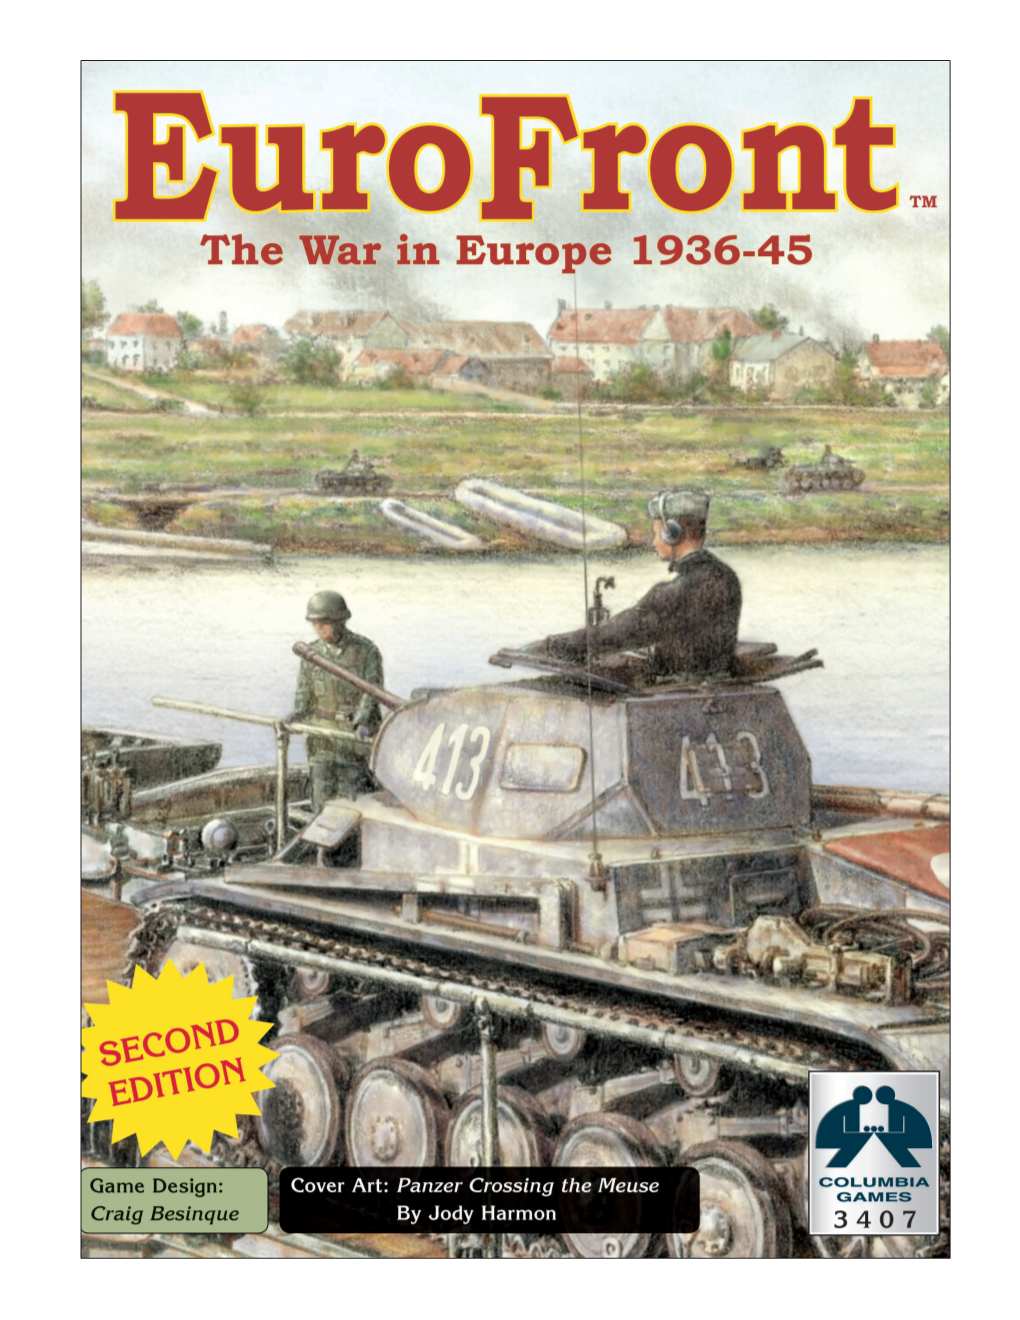 Eurofront the War in Europe, 1936-45